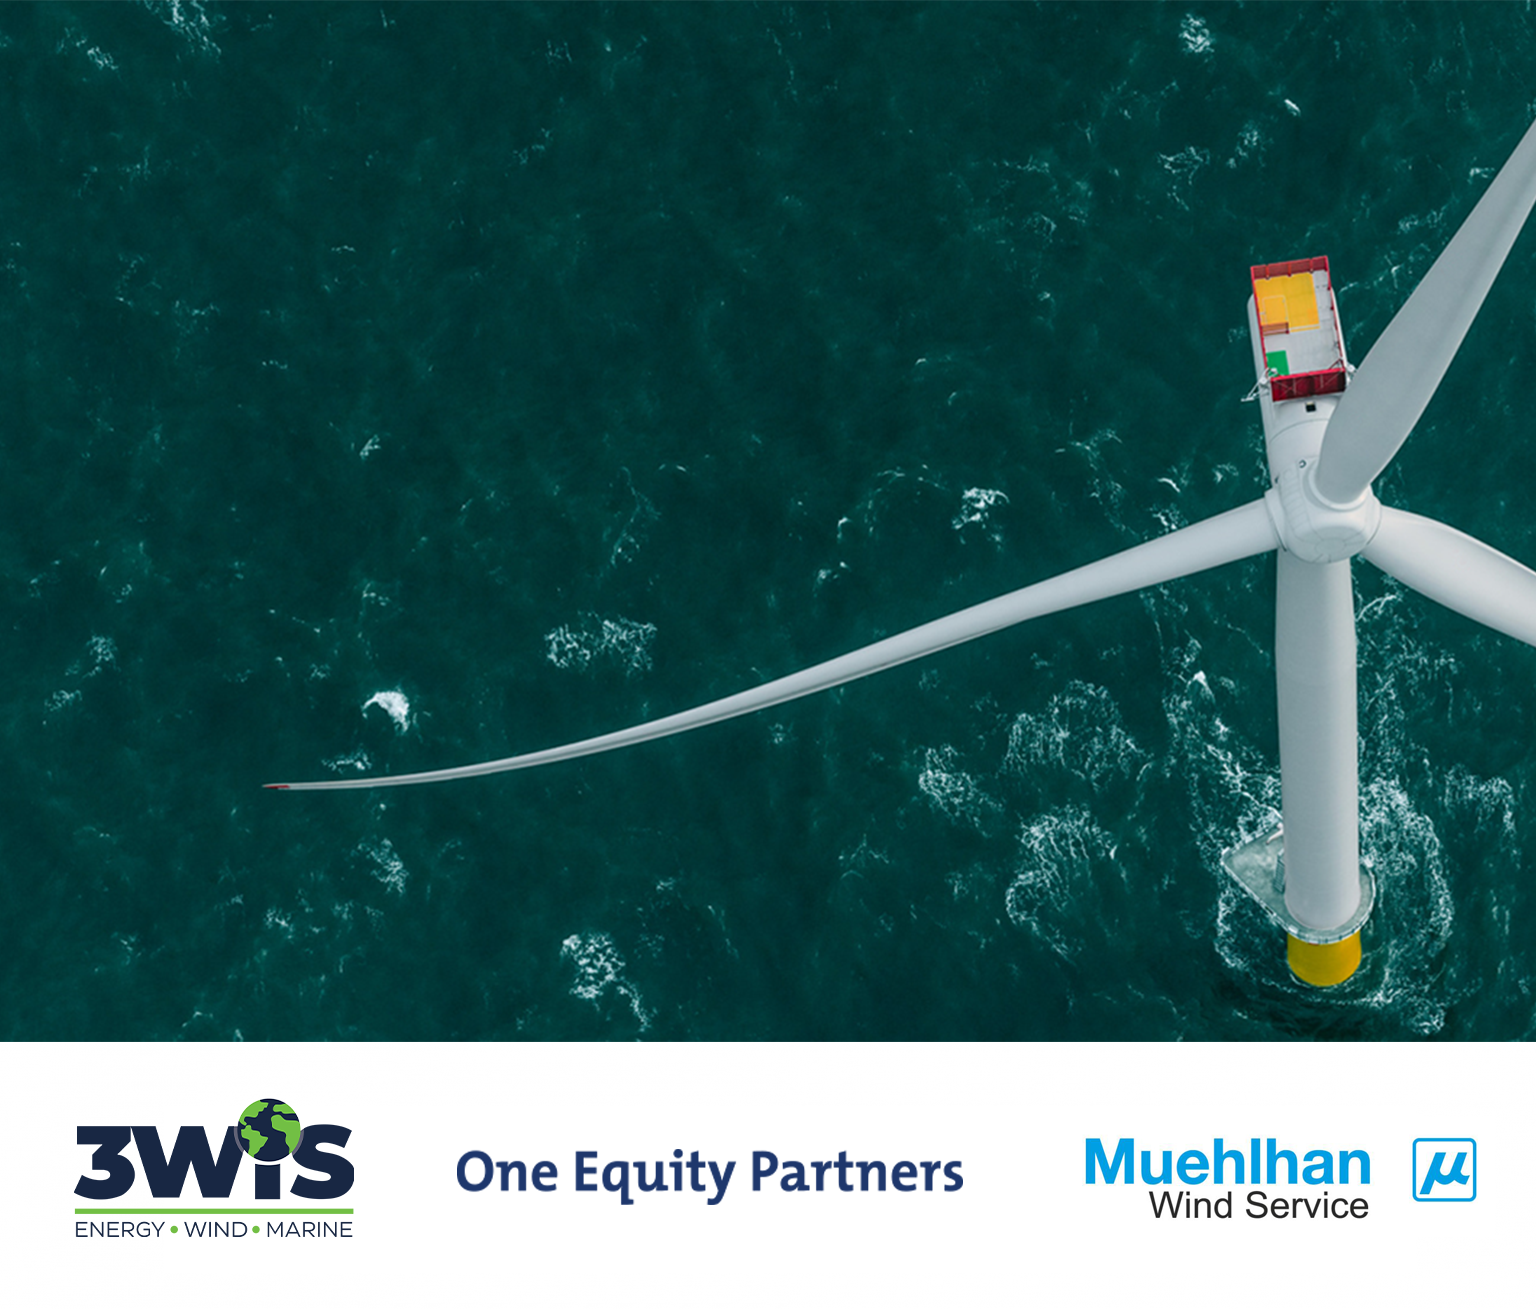 Advisor to 3WIS in the sale to Muehlhan Wind Service